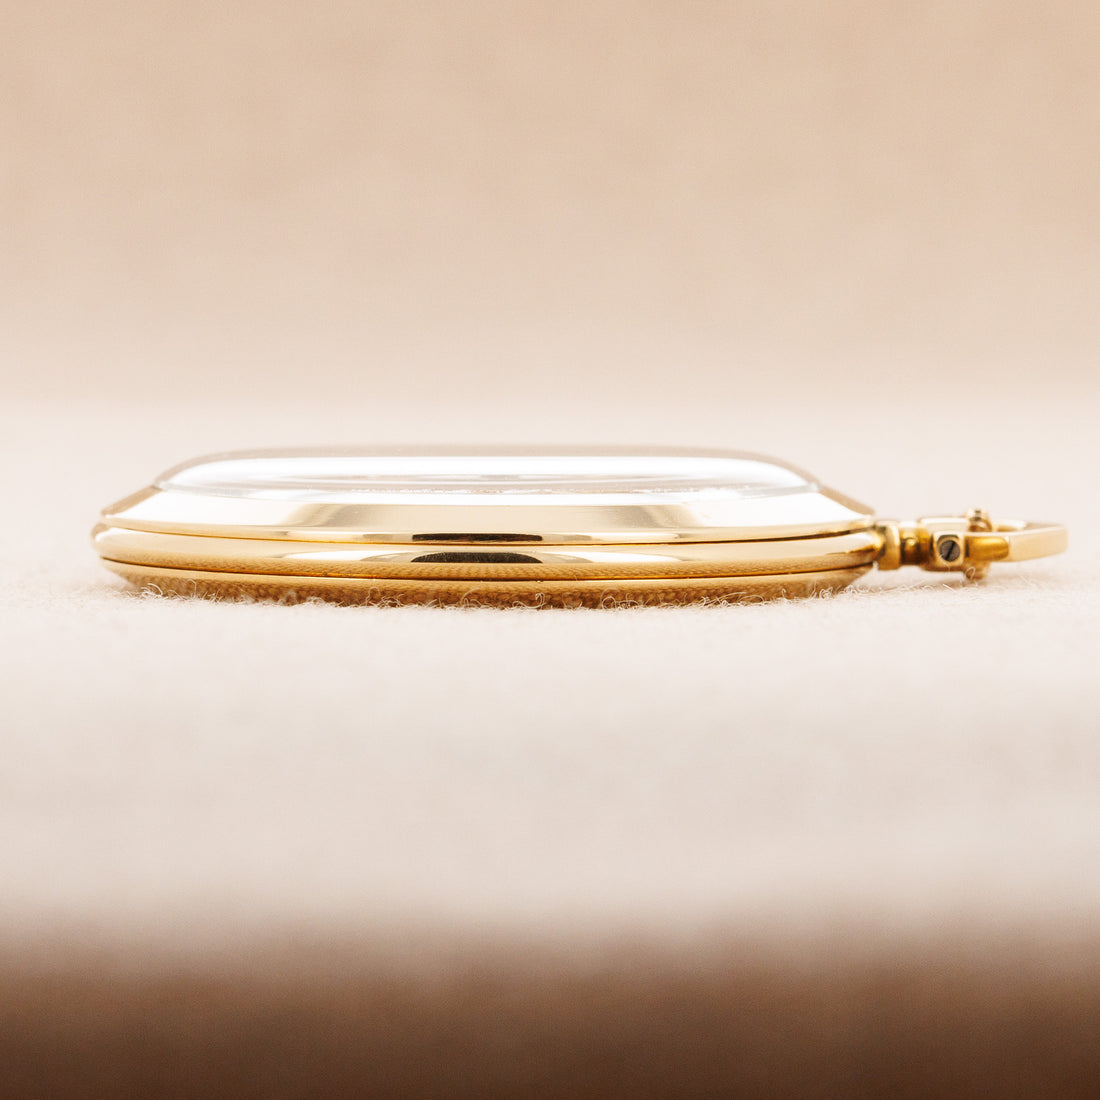 Cartier Yellow Gold Minute Repeating Pocket Watch